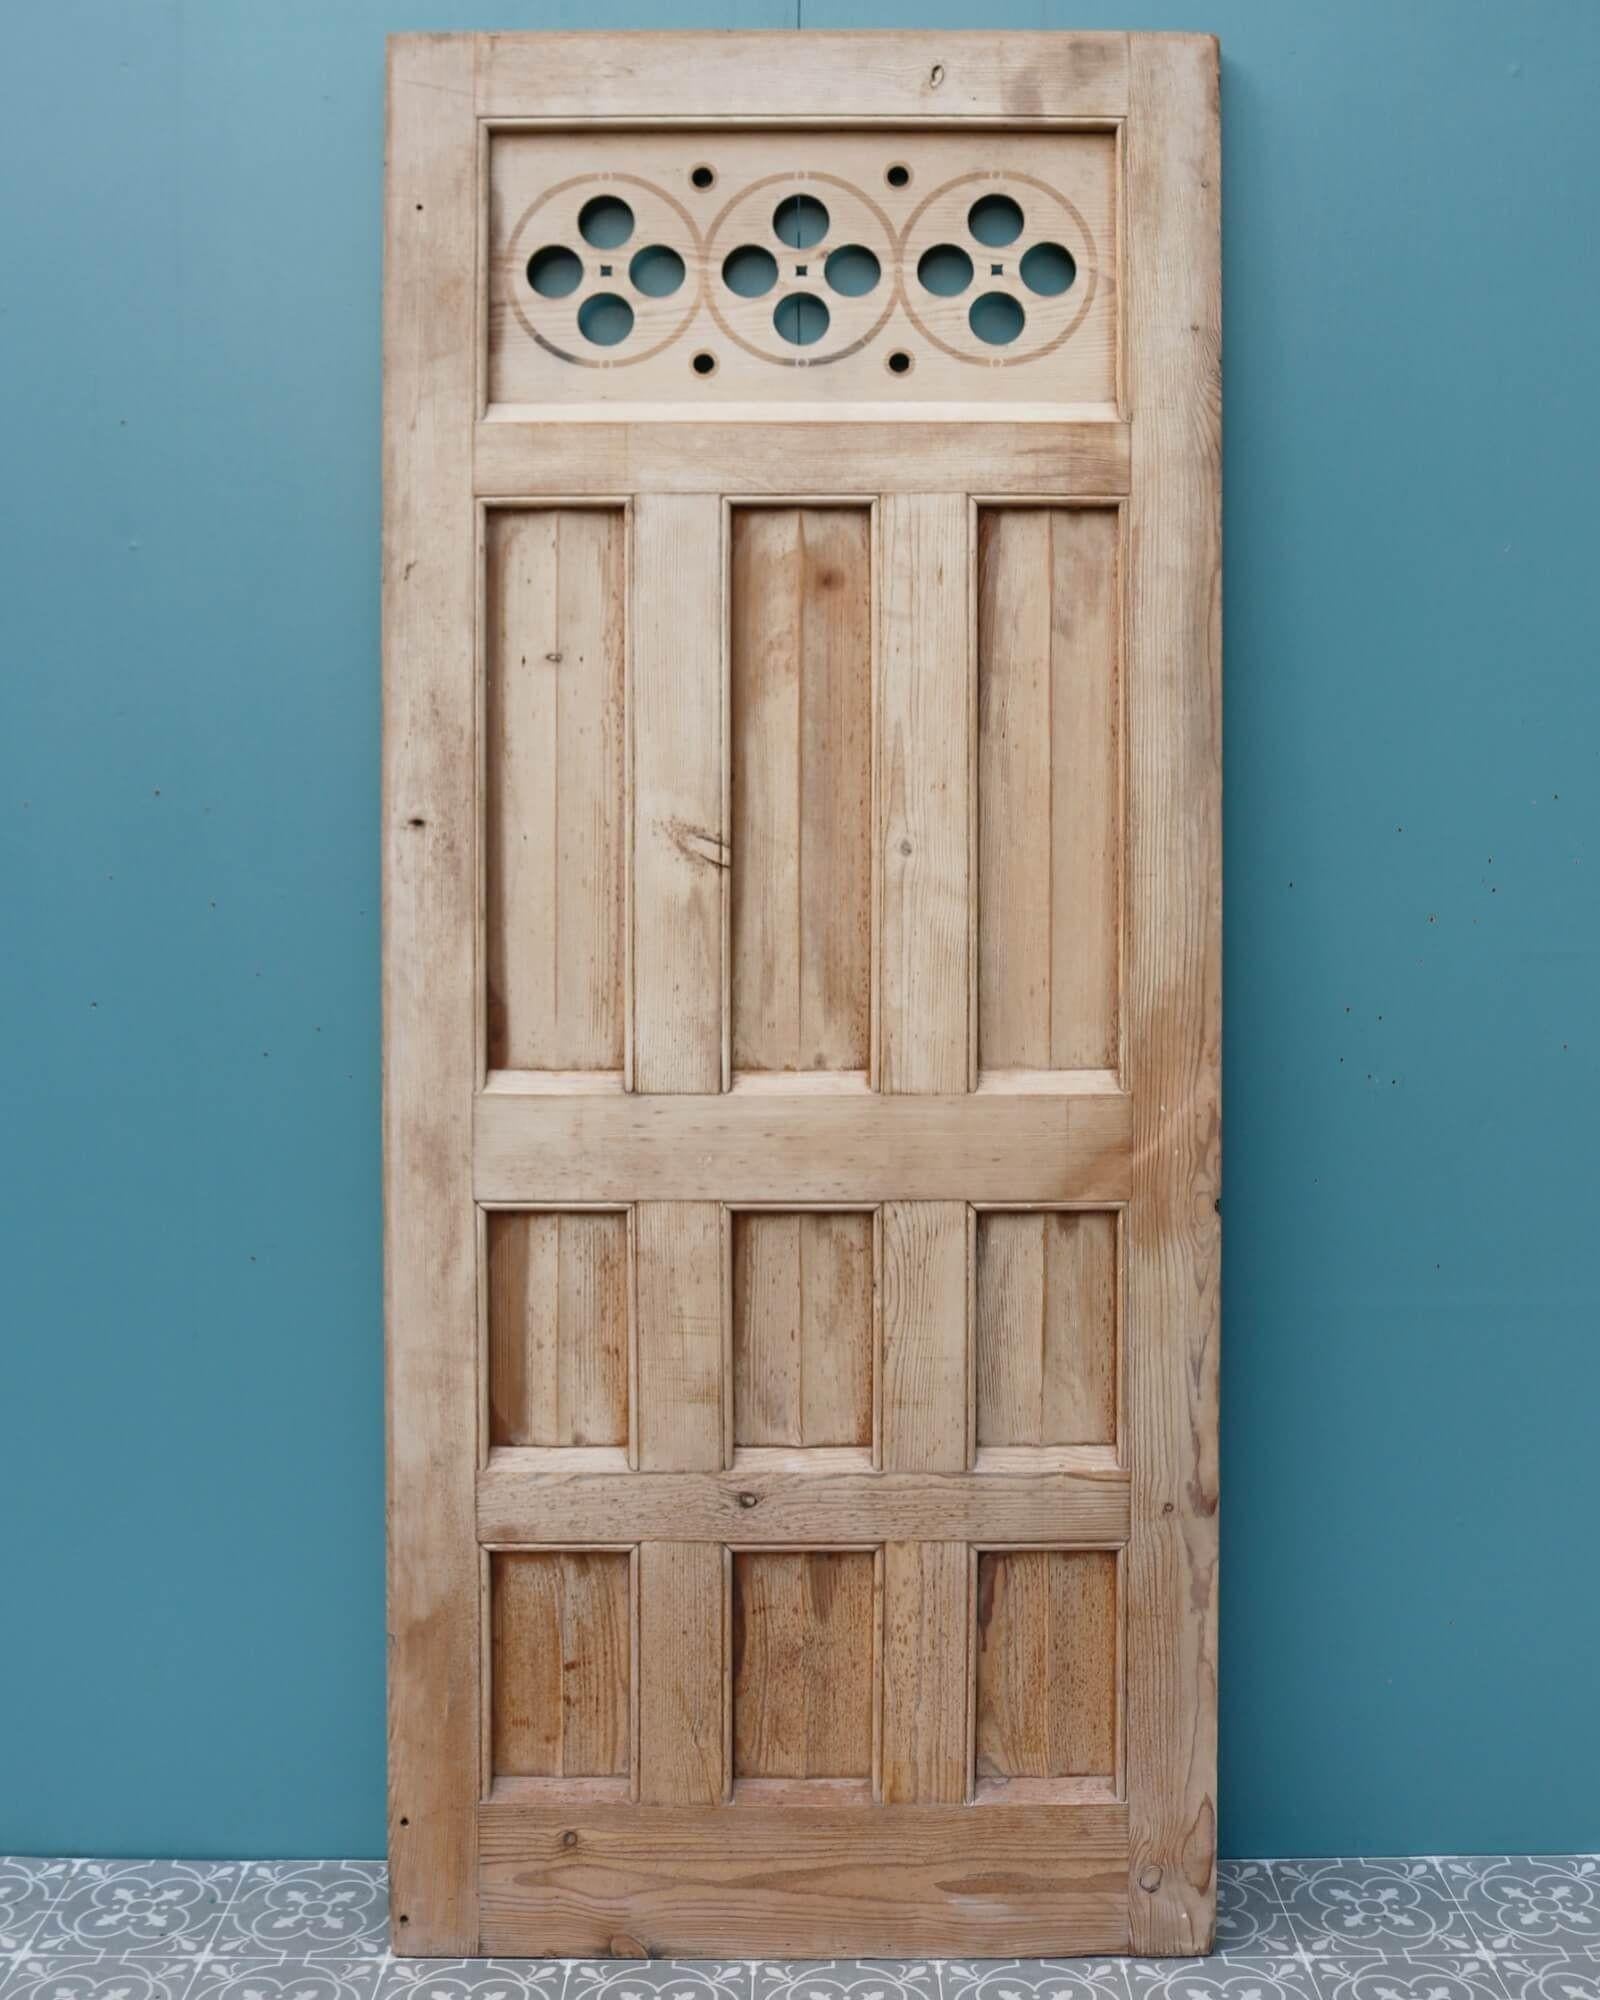 Sourced from an English church, this ecclesiastical style wall panel or door has an unusual design, making a stunning feature in any setting. It is crafted in pine with vertical paneling below a large horizontal panel decorated with circles and